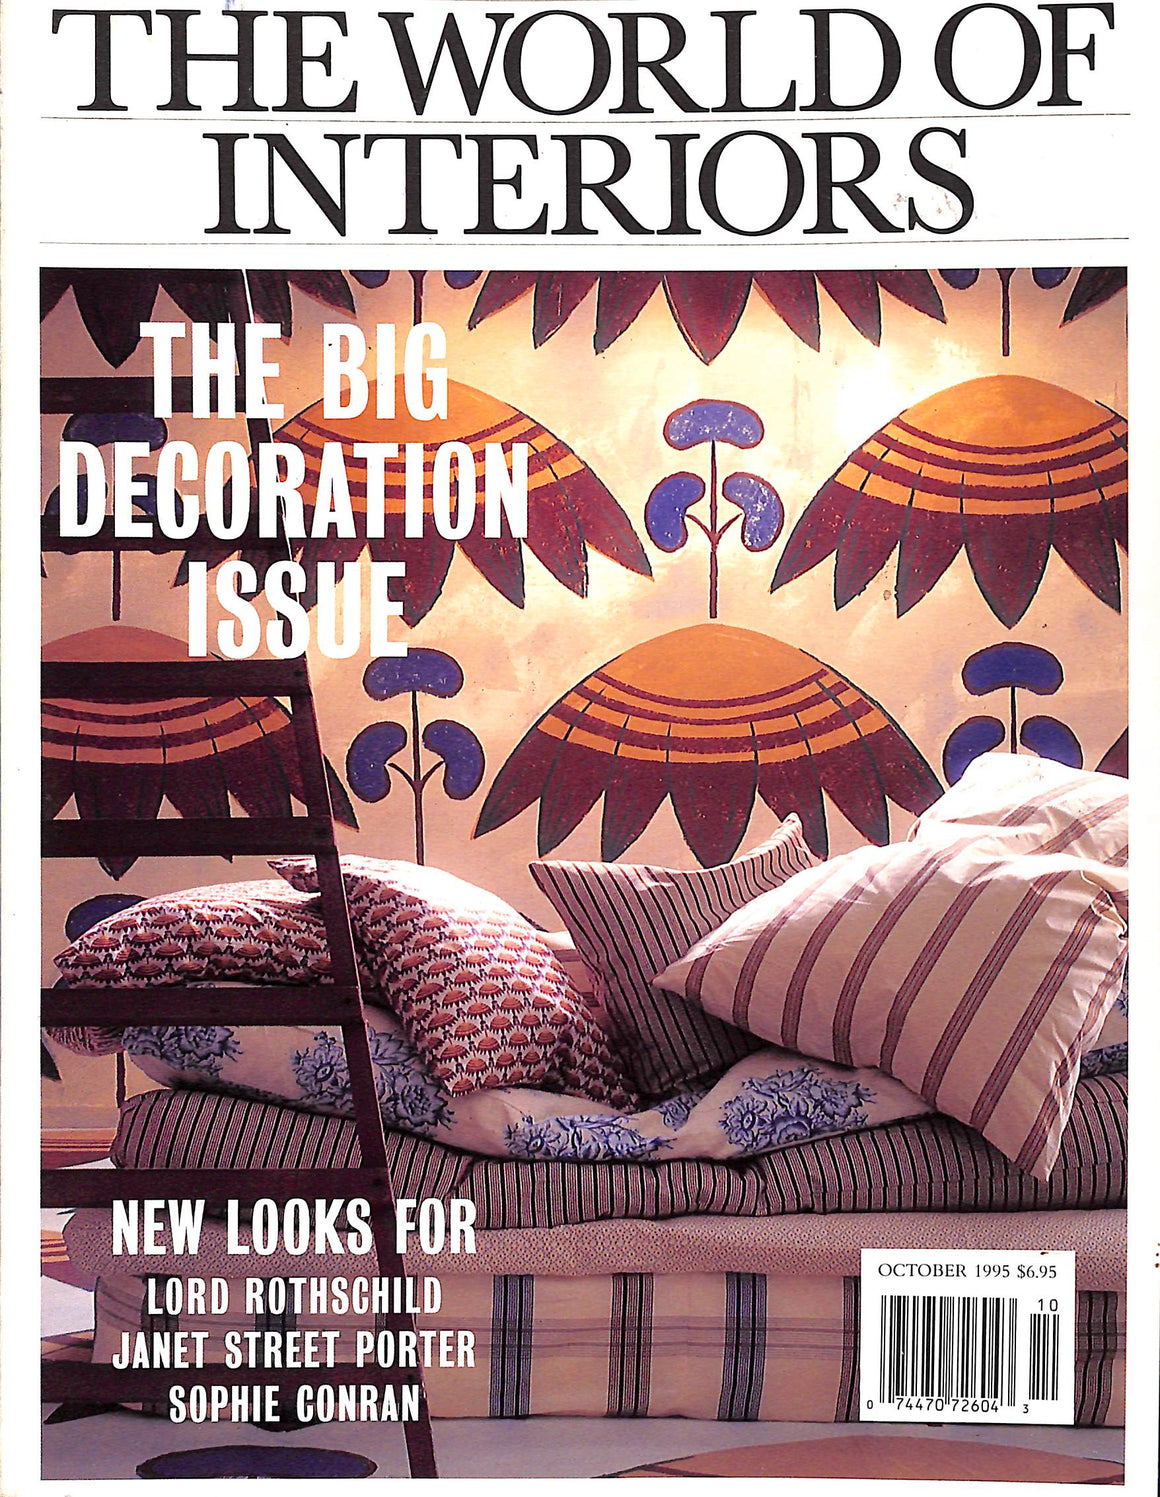 The World Of Interiors: The Big Decoration Issue October 1995